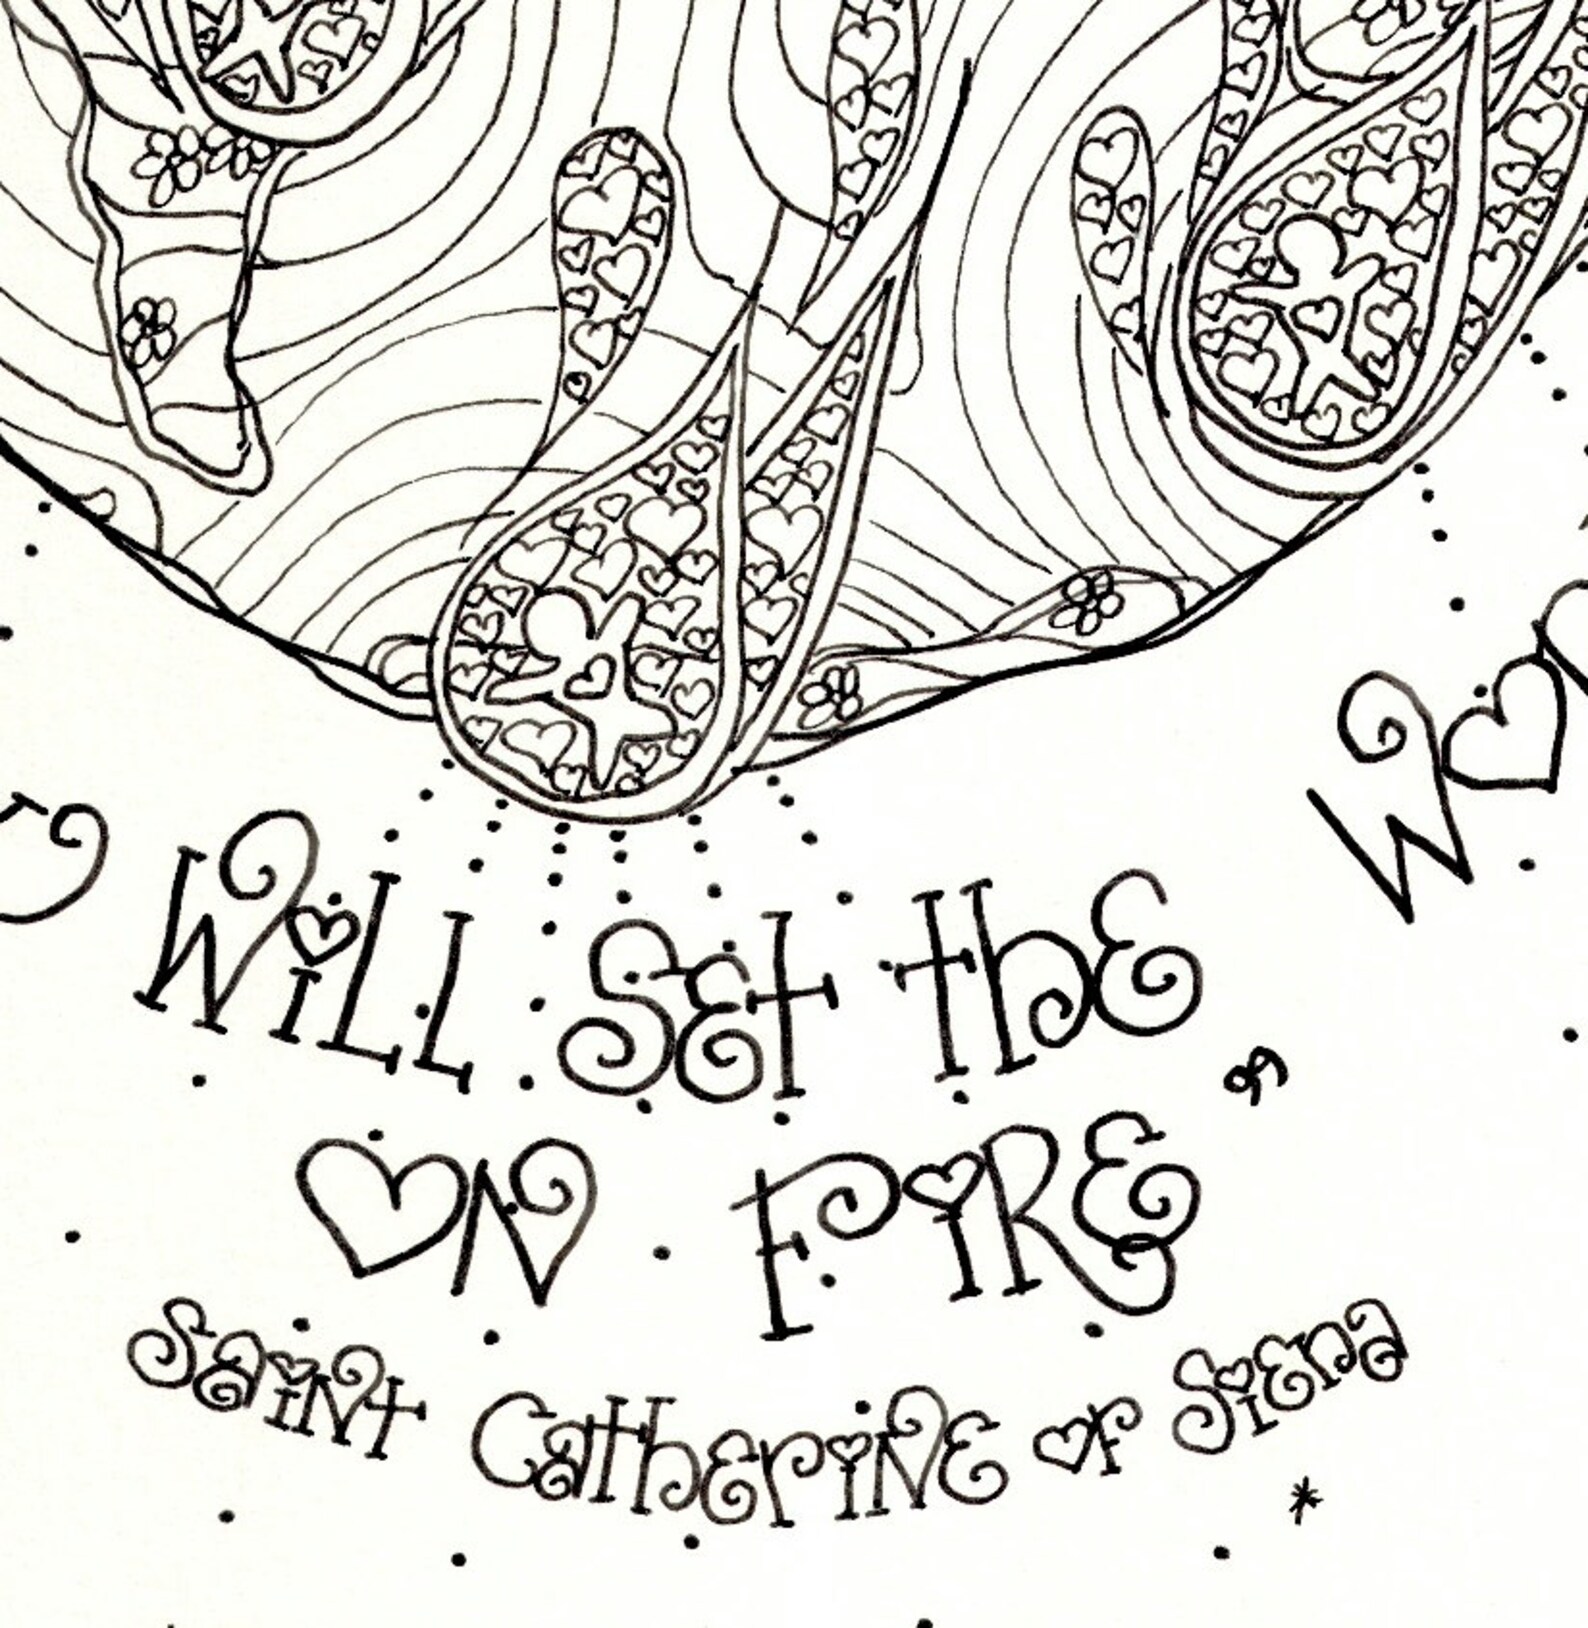 printable-st-catherine-of-siena-coloring-page-for-grownups-etsy